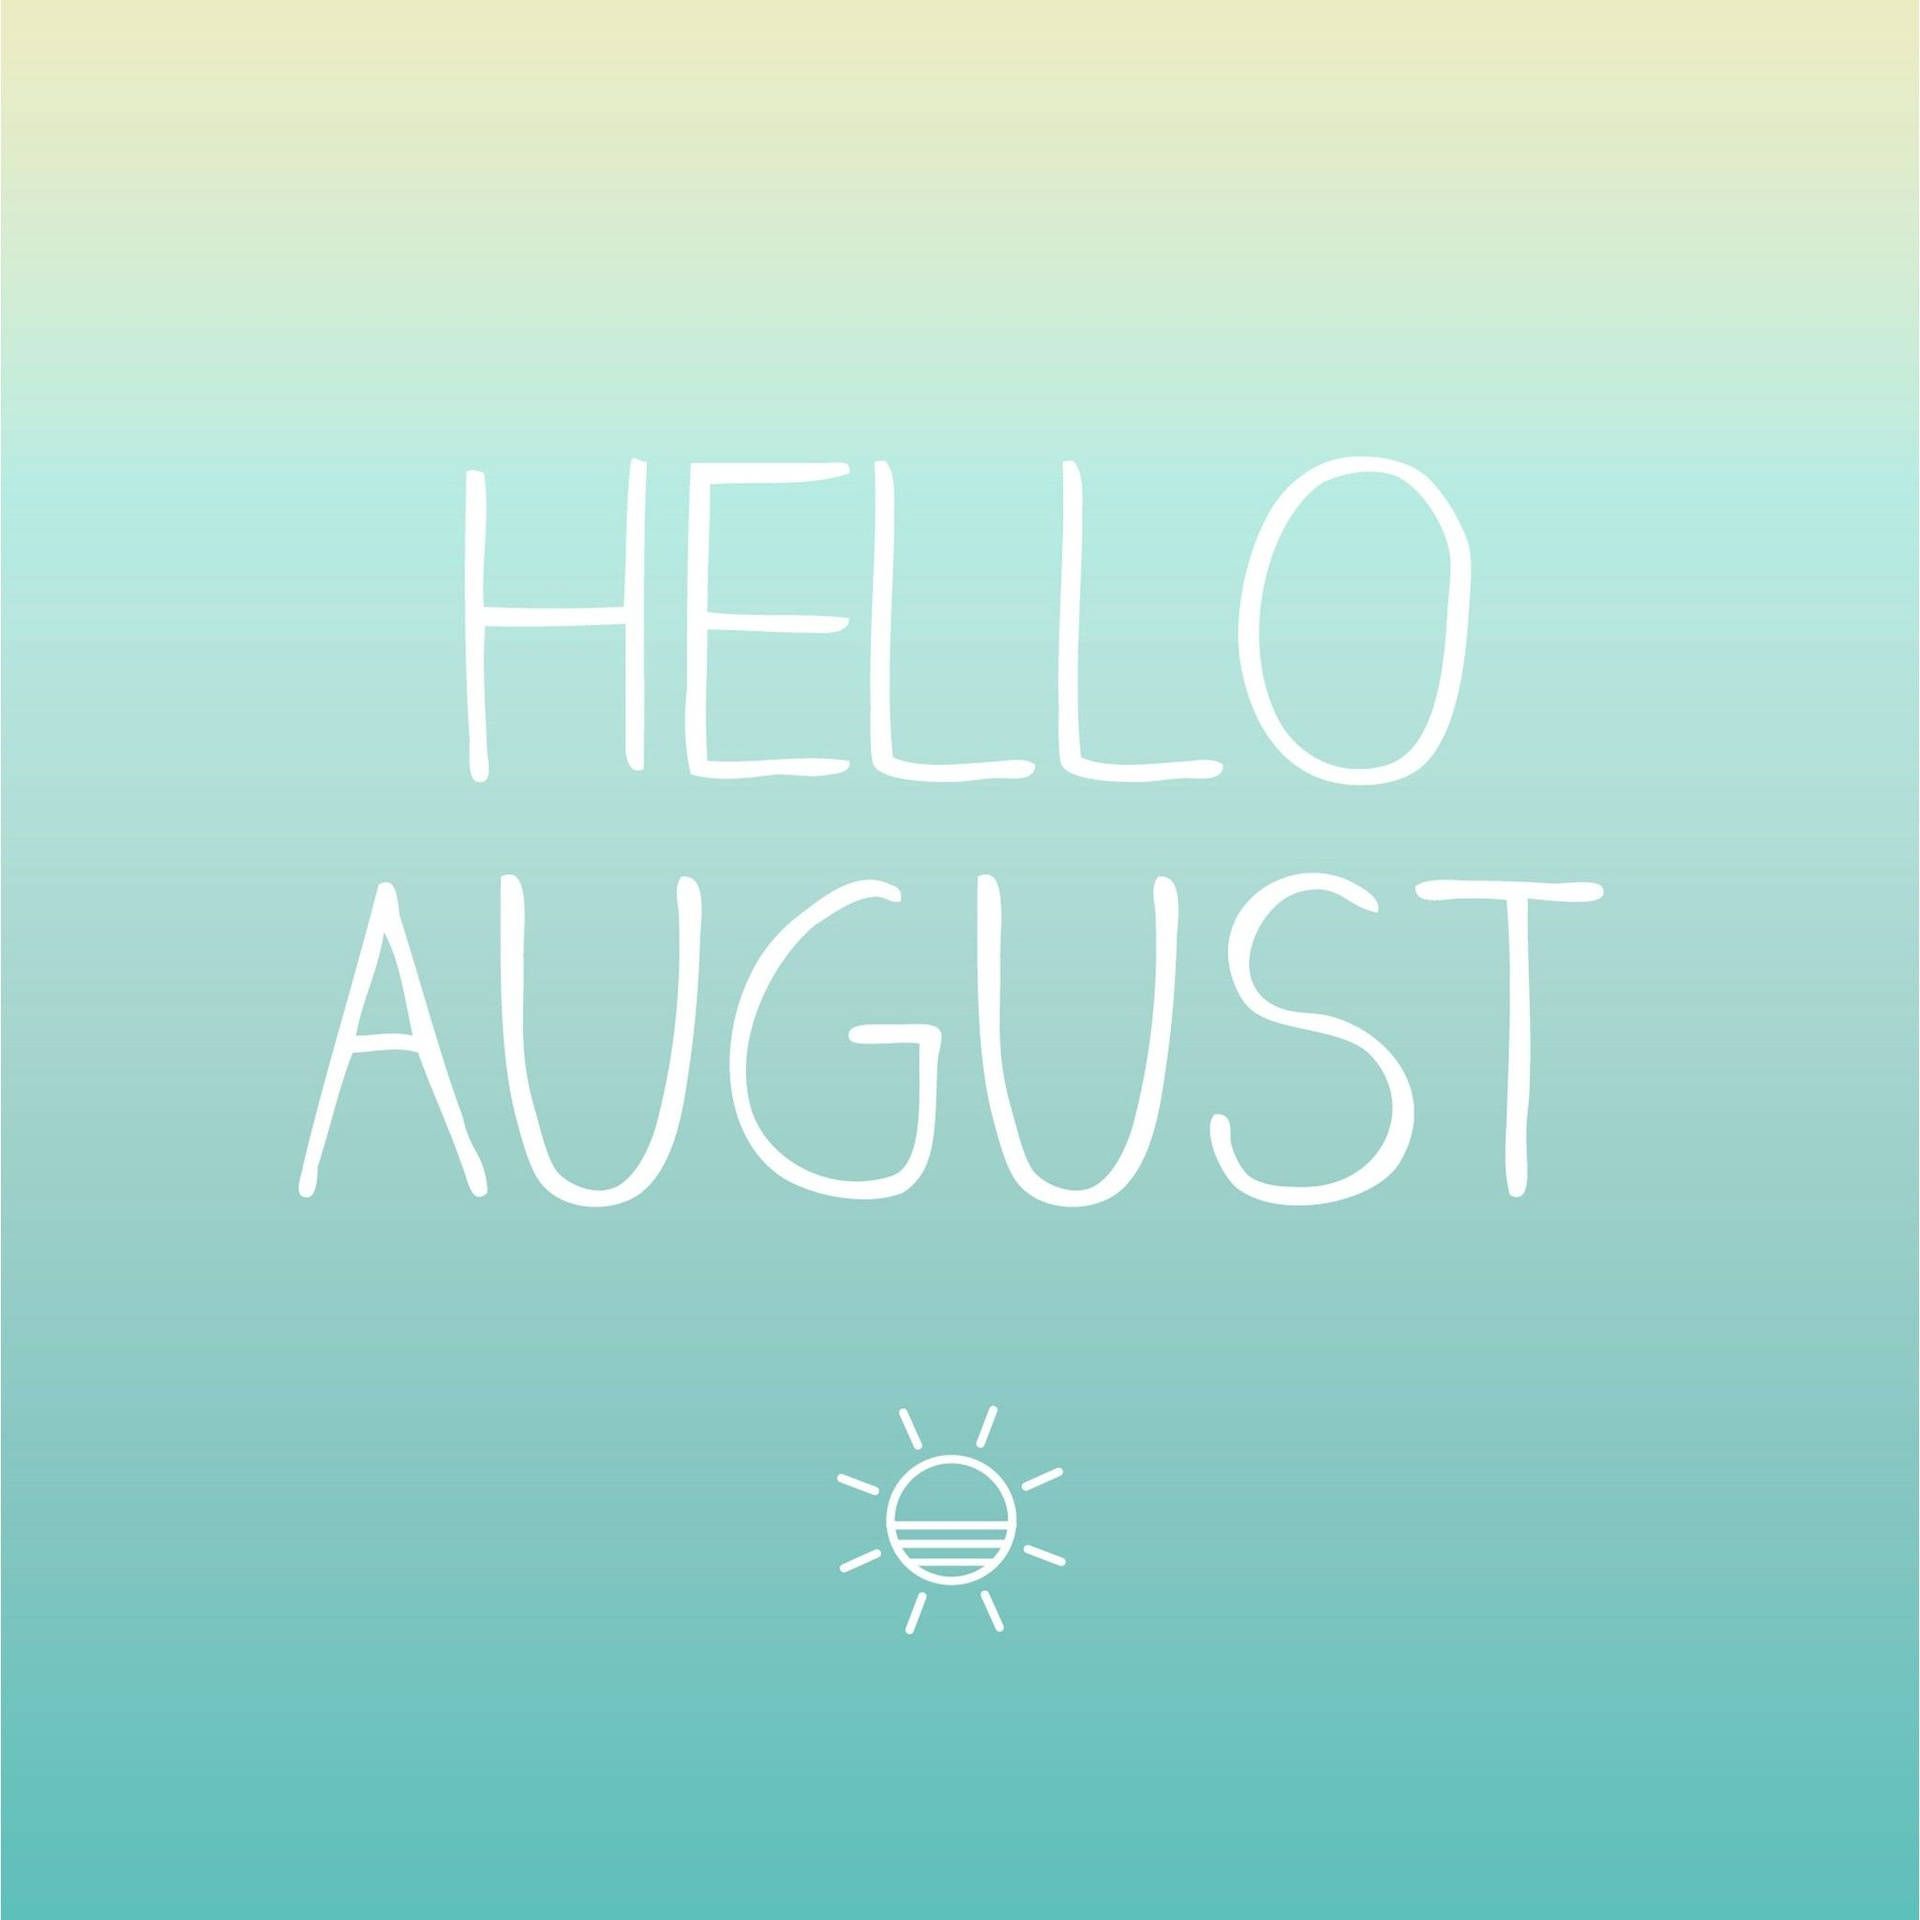 Free August Wallpaper Downloads, August Wallpaper for FREE